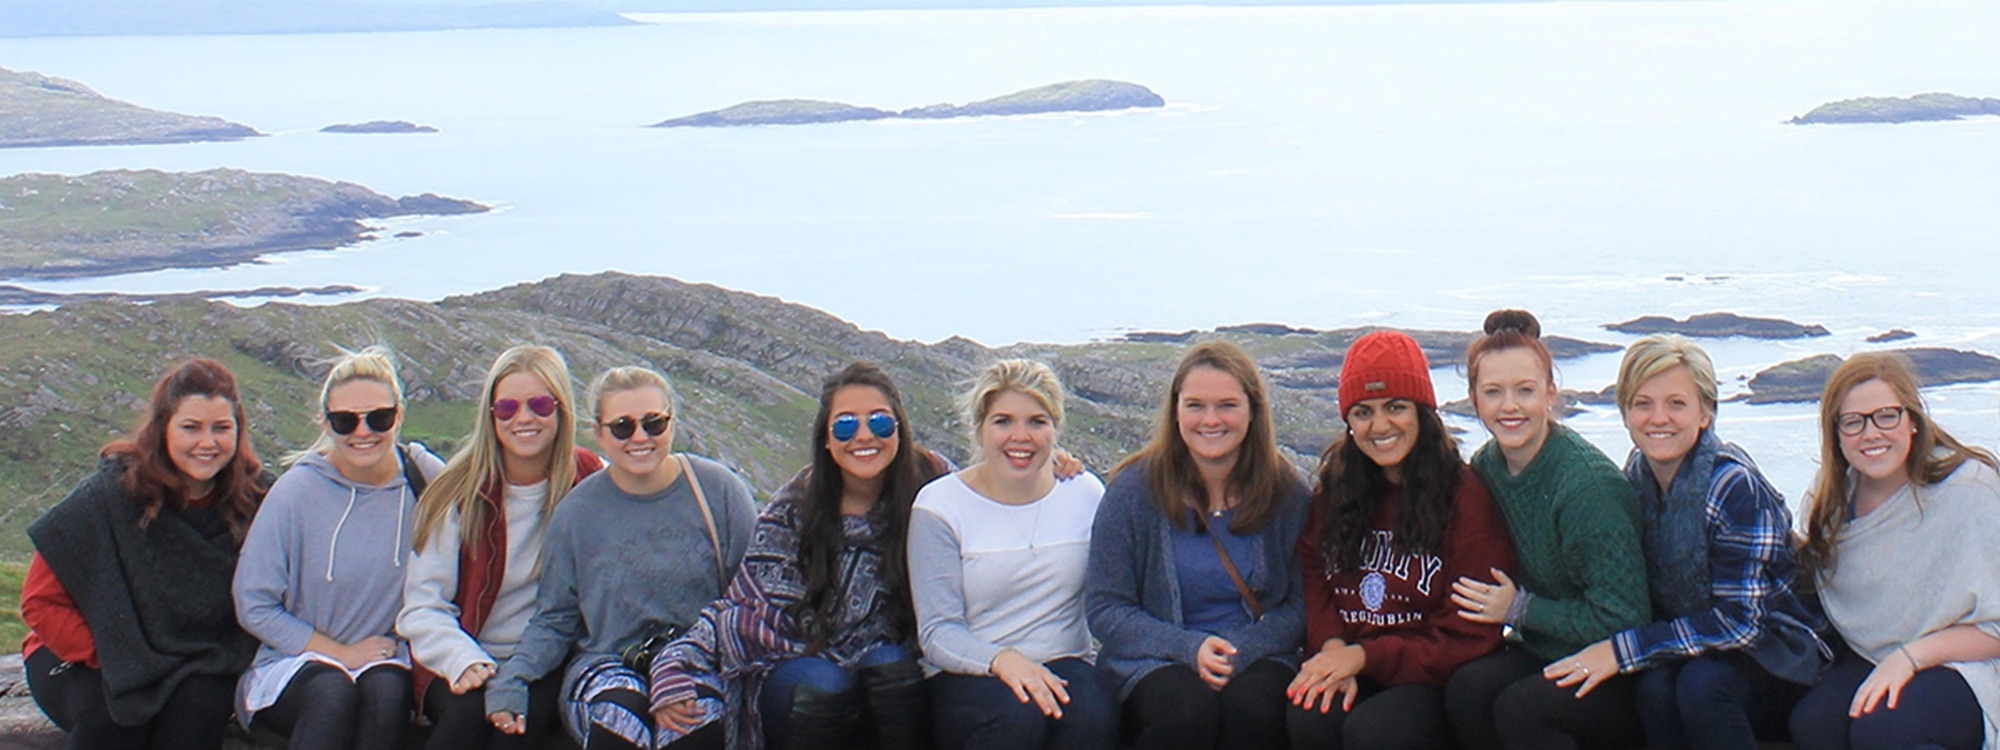 PLC students in a group photo with the Ireland coast behind them.